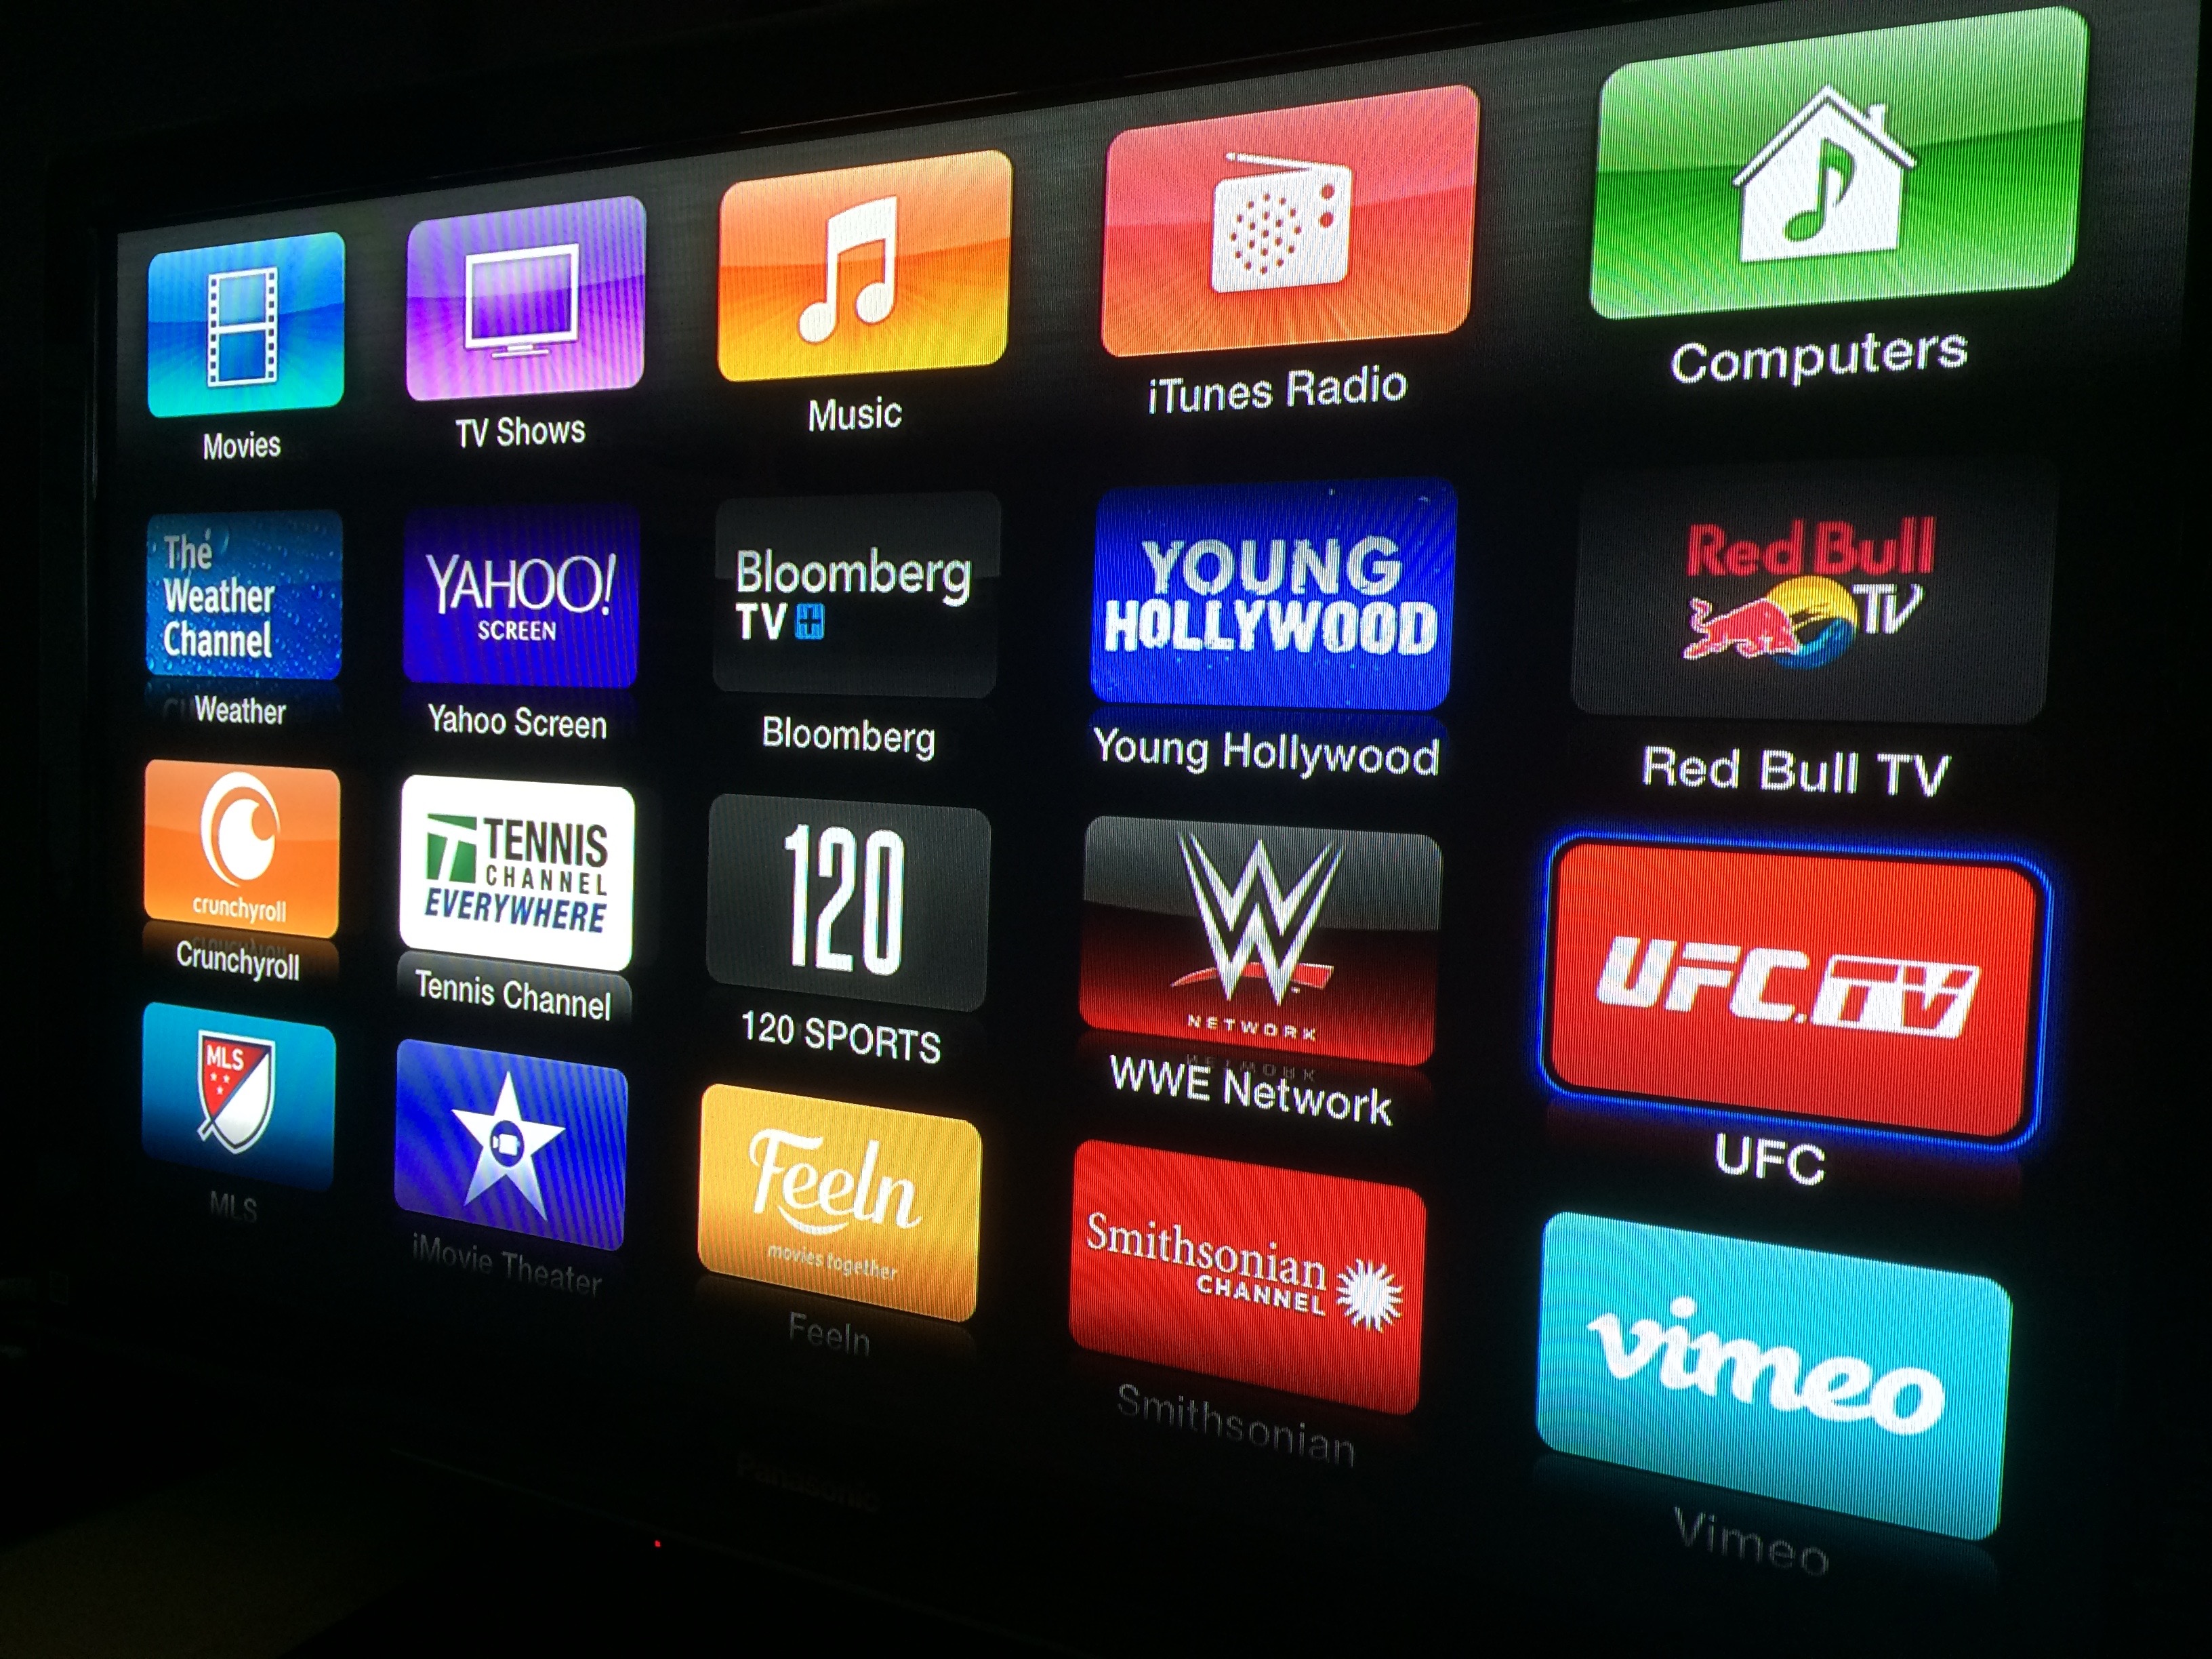 Customize Apple TV to Show Only the Channels You Use MacRumors